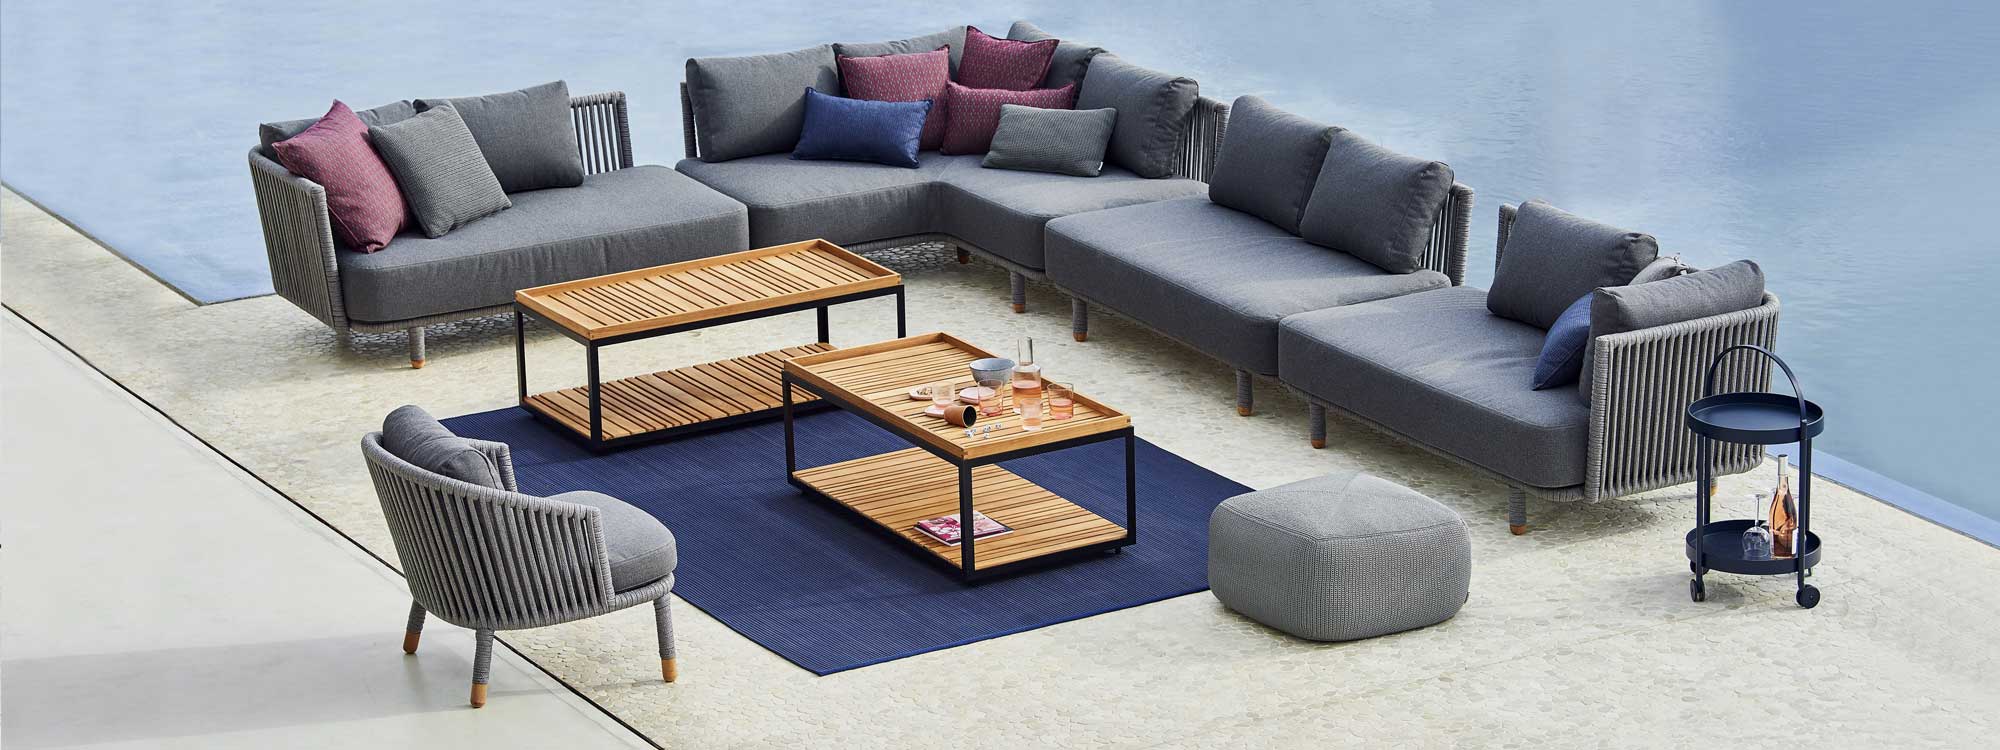 Image of pair of rectangular Cane-line Level coffee tables with teak tops, surrounded by large Moments grey corner sofa